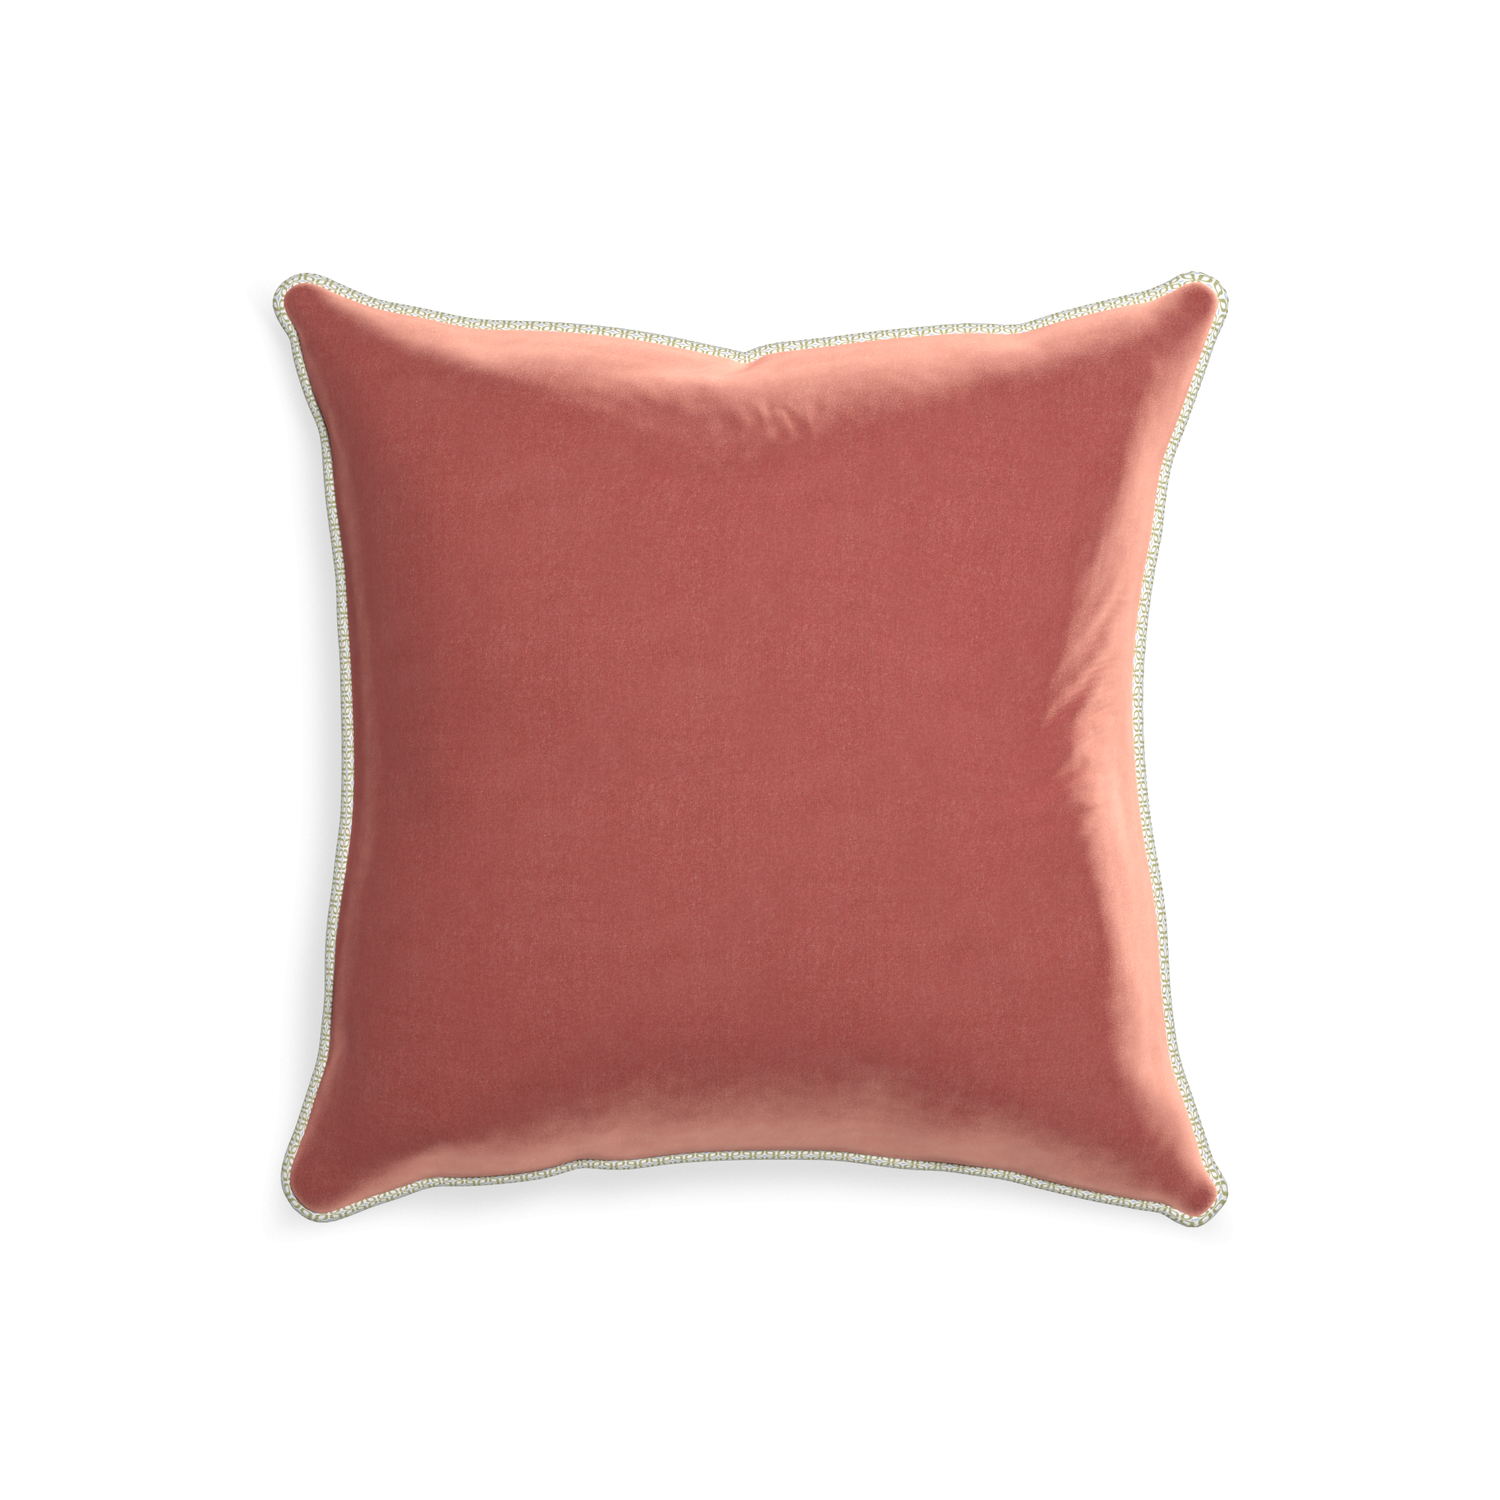 20-square cosmo velvet custom coralpillow with l piping on white background